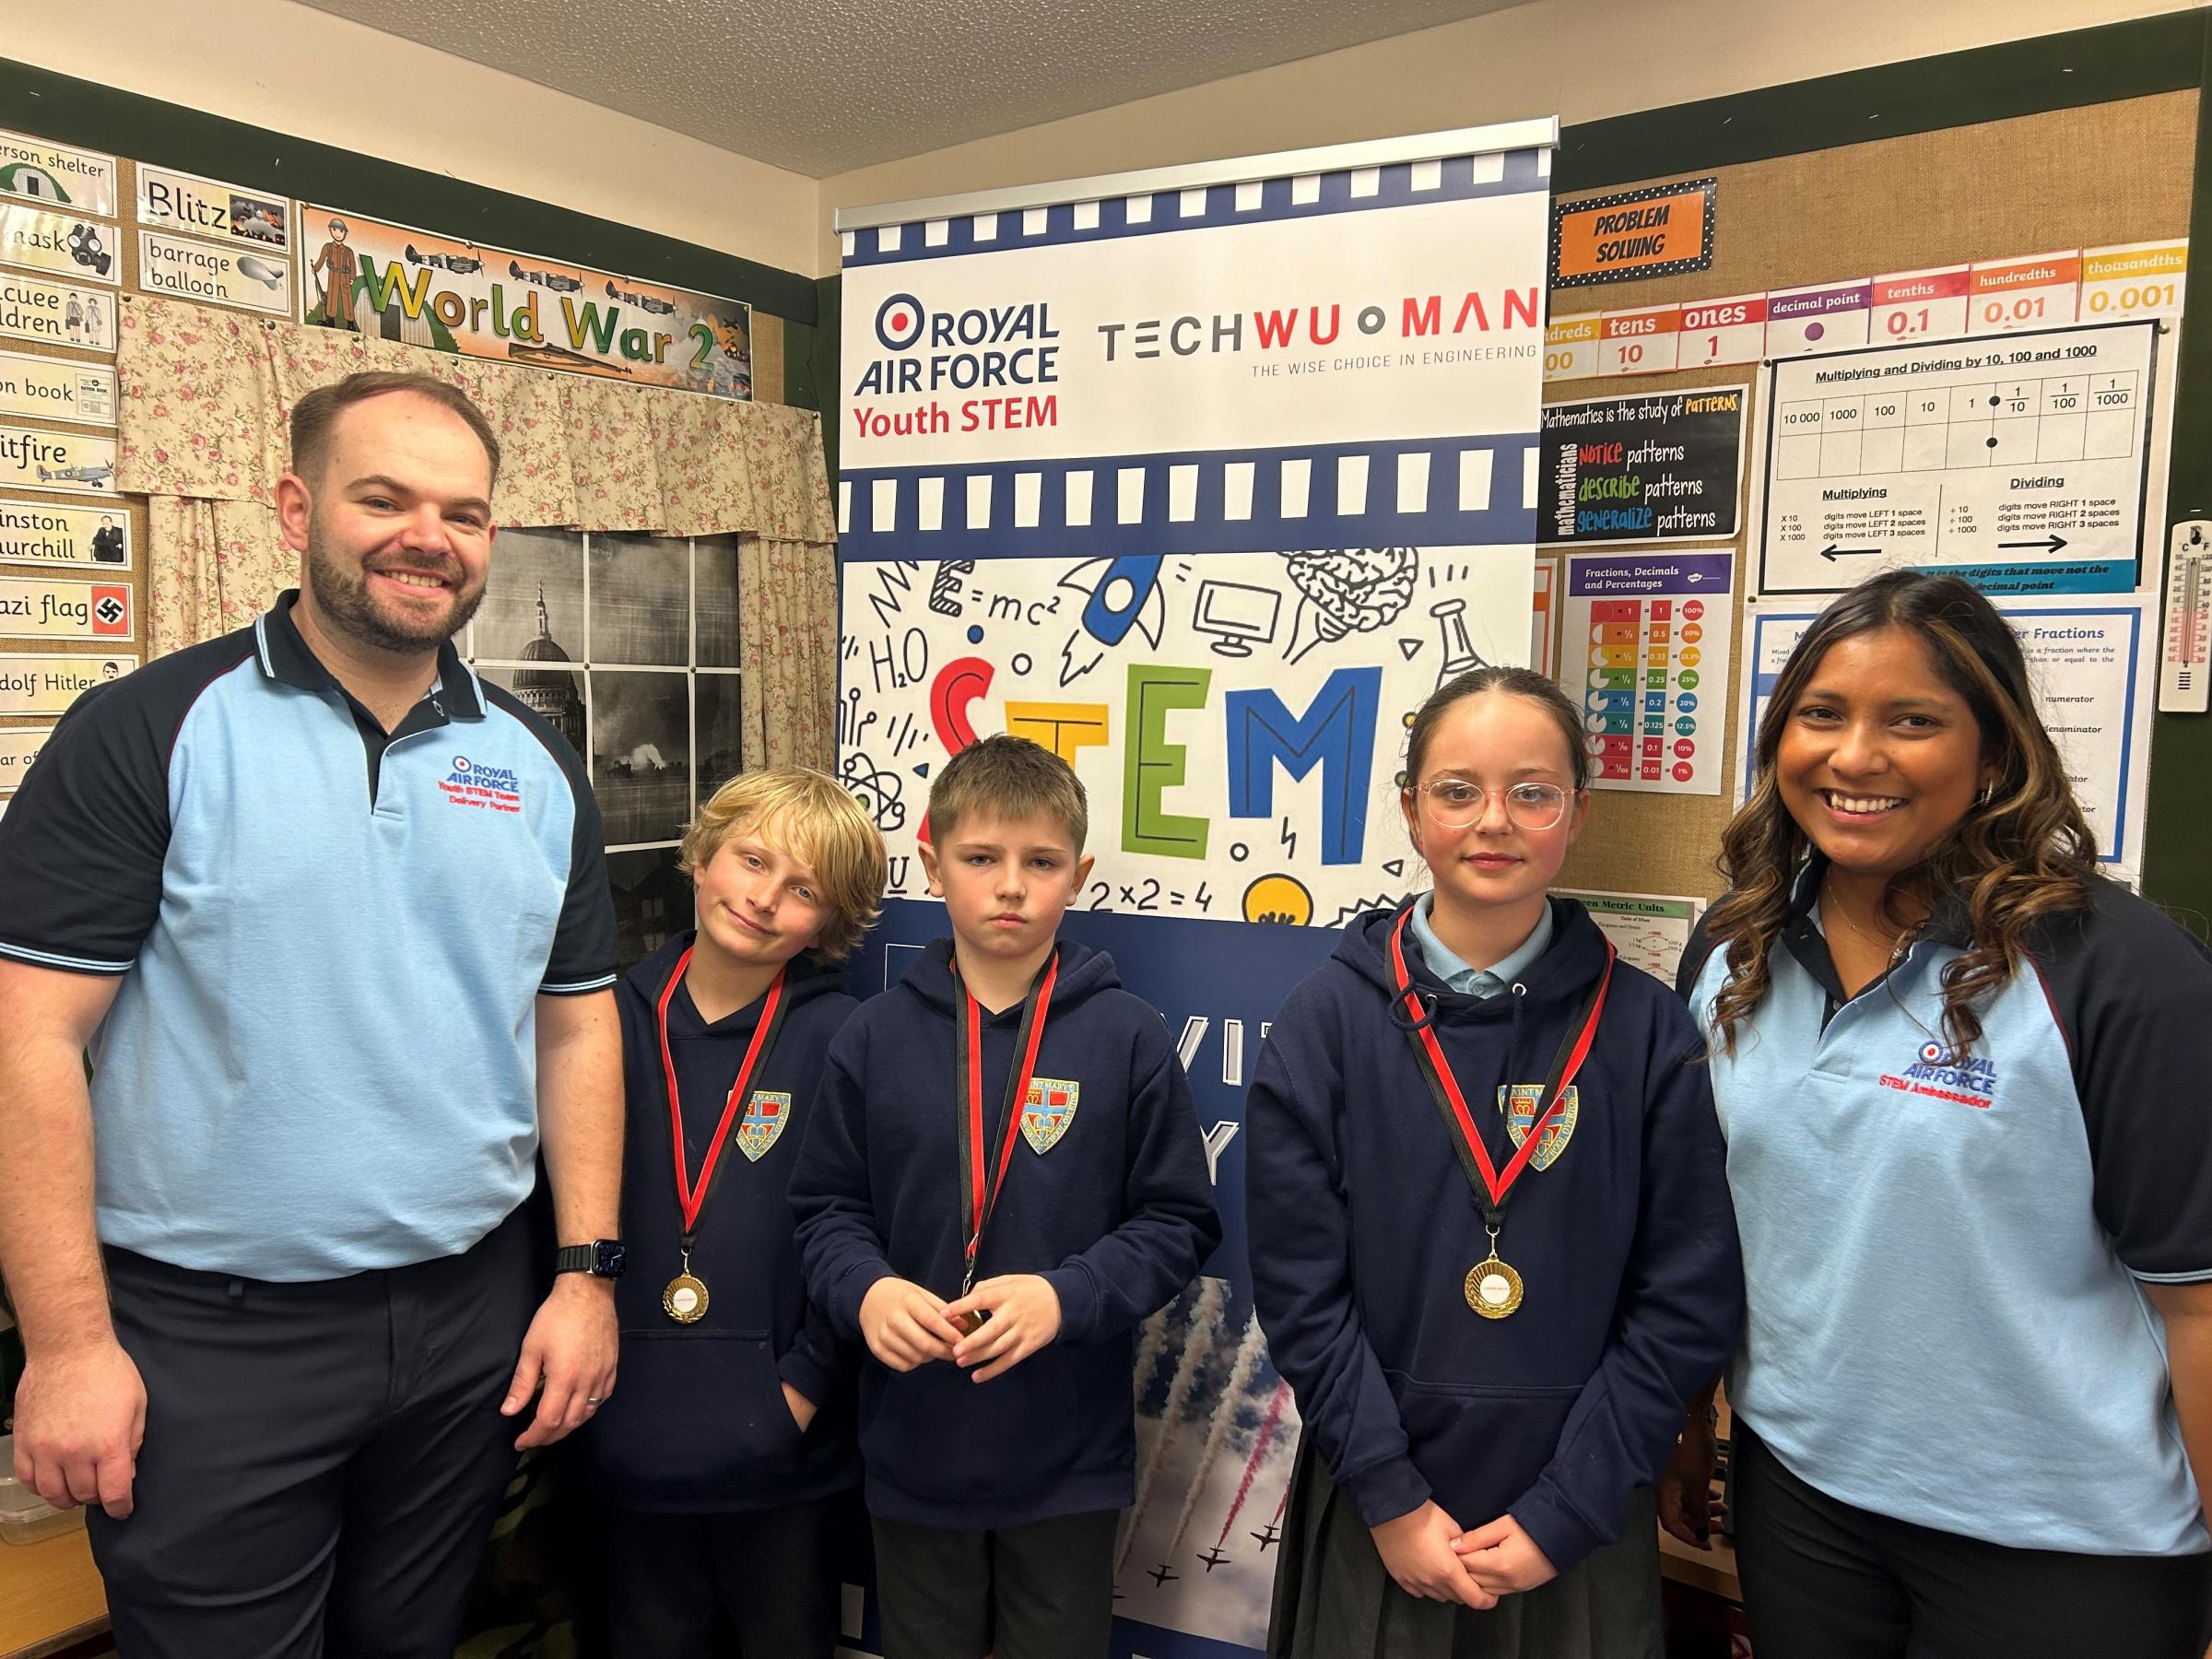 Melissa Ahmed and Greg Beddoe, from Techwuman, hosted a STEM activity day at St Marys, Overton.